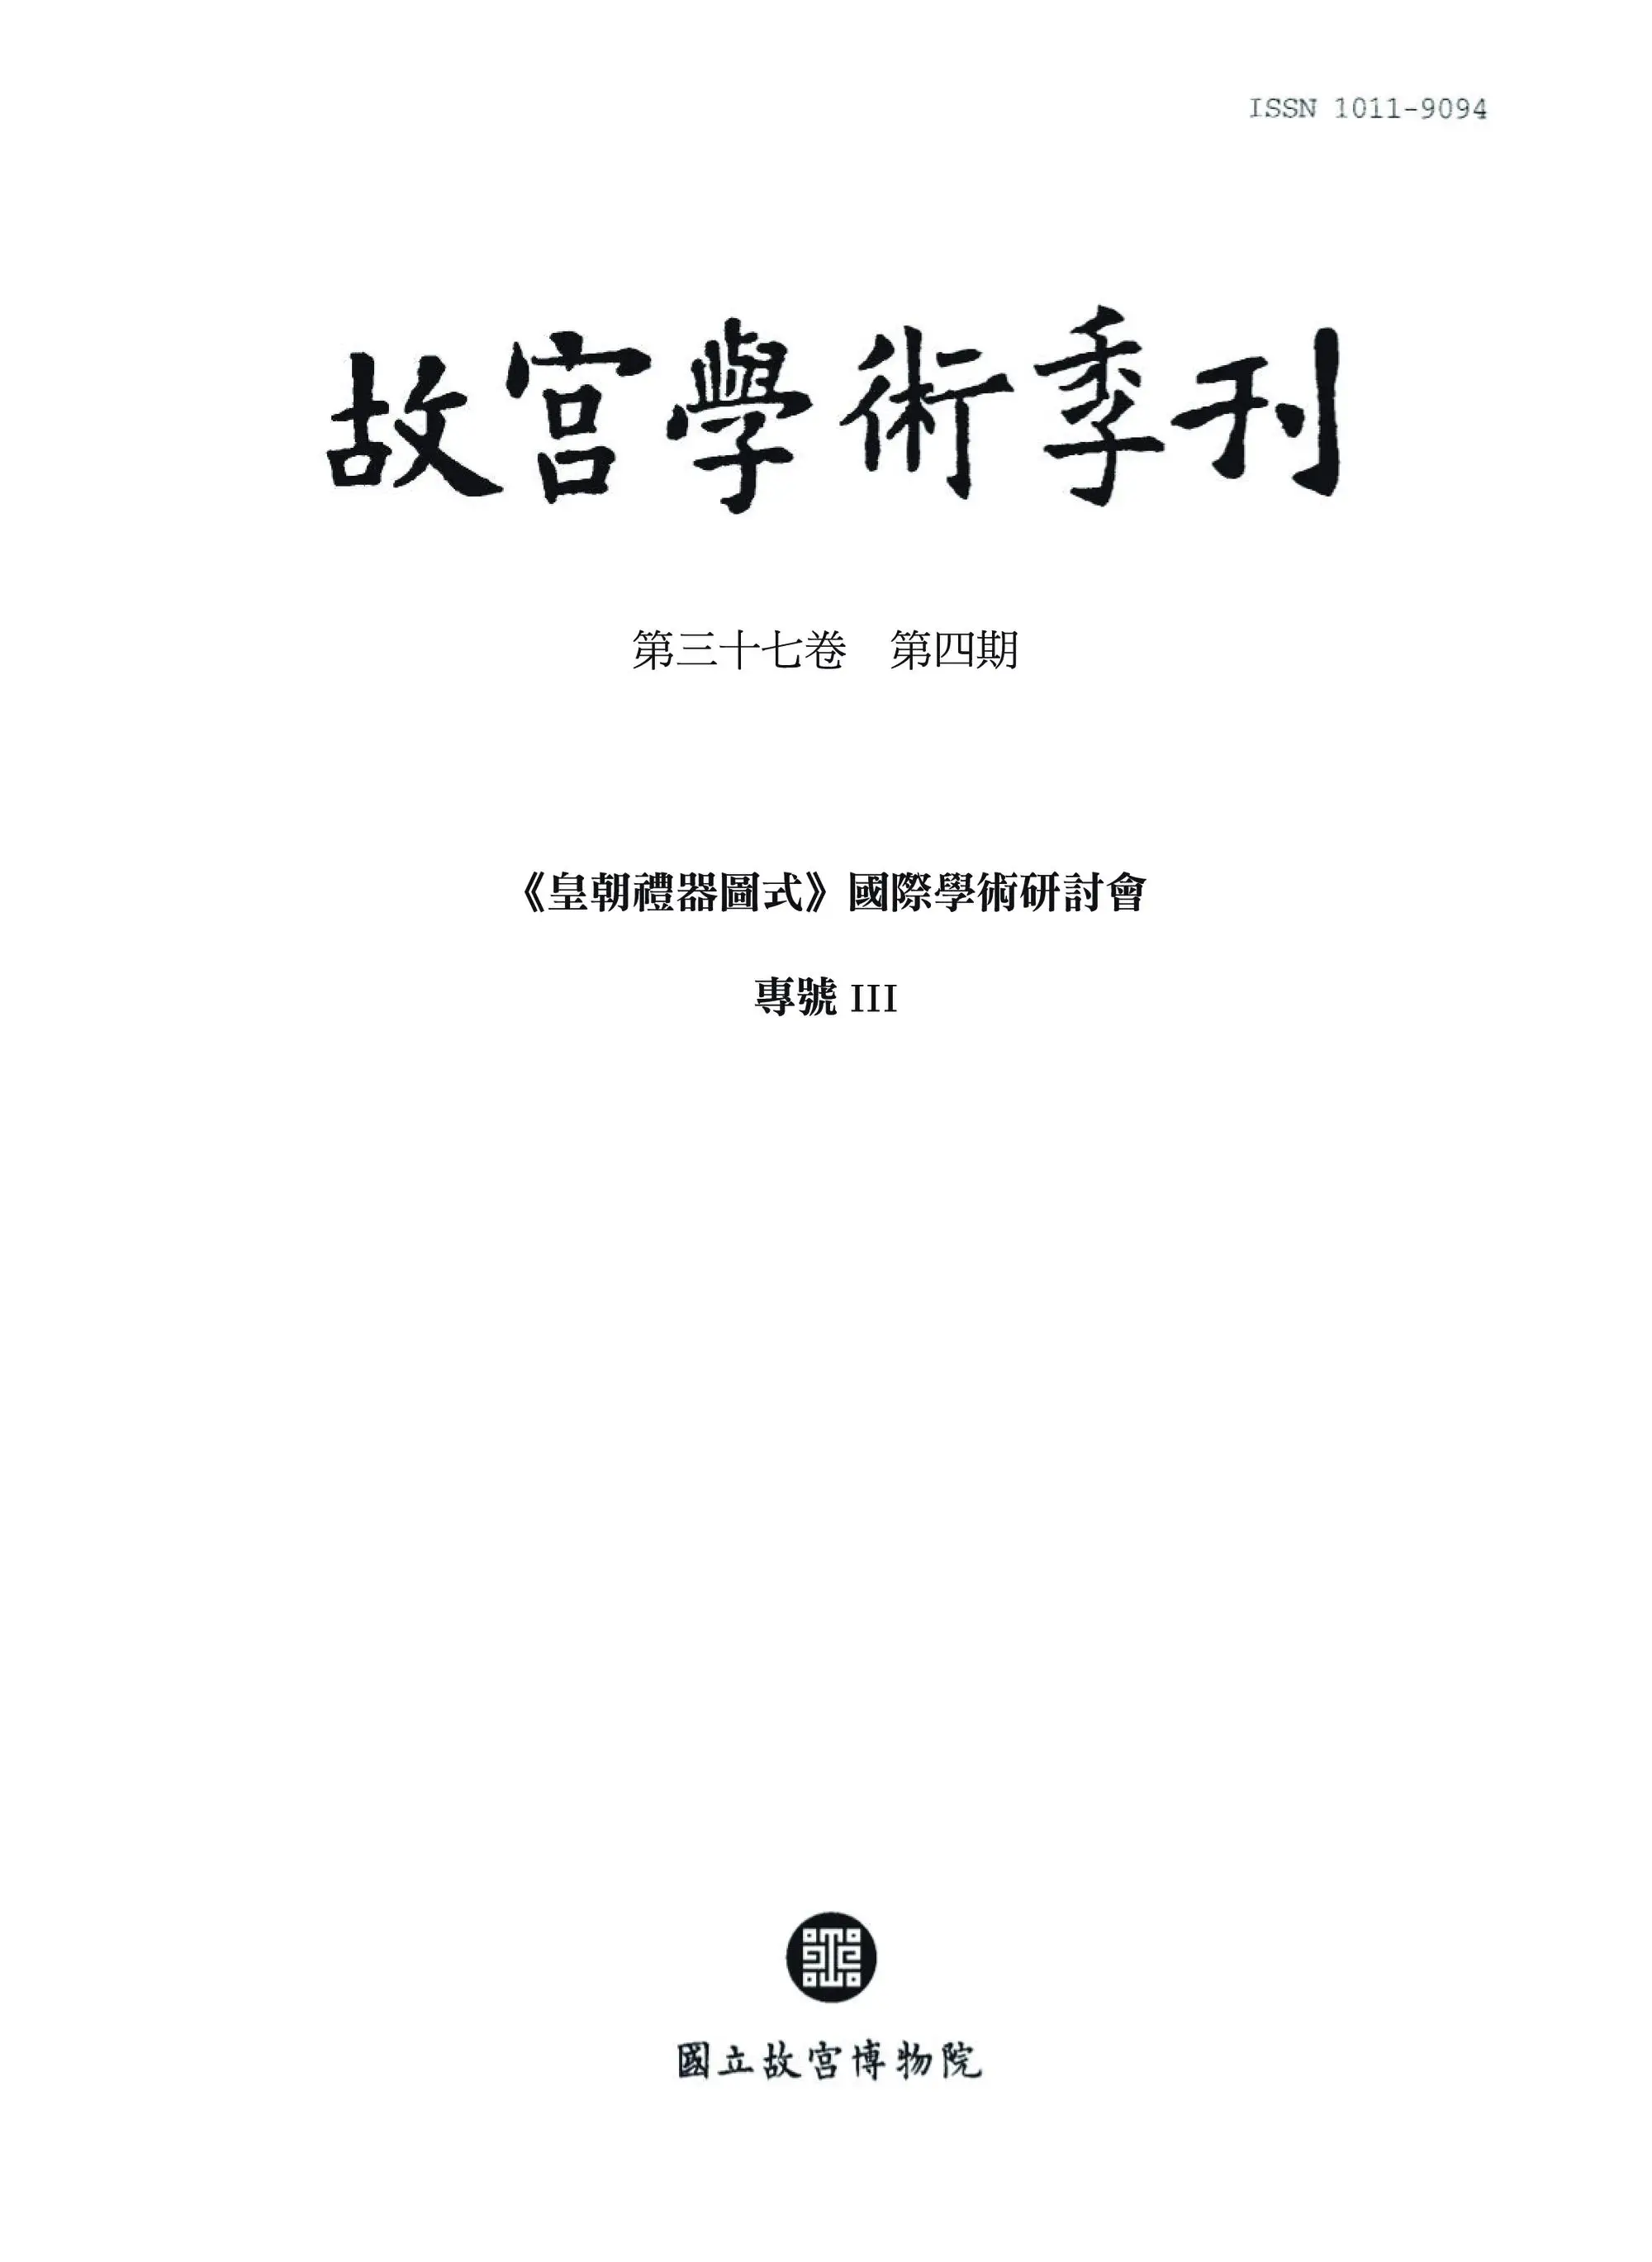 The National Palace Museum Research Quarterly 故宮學術季刊 – 01 十月 2020